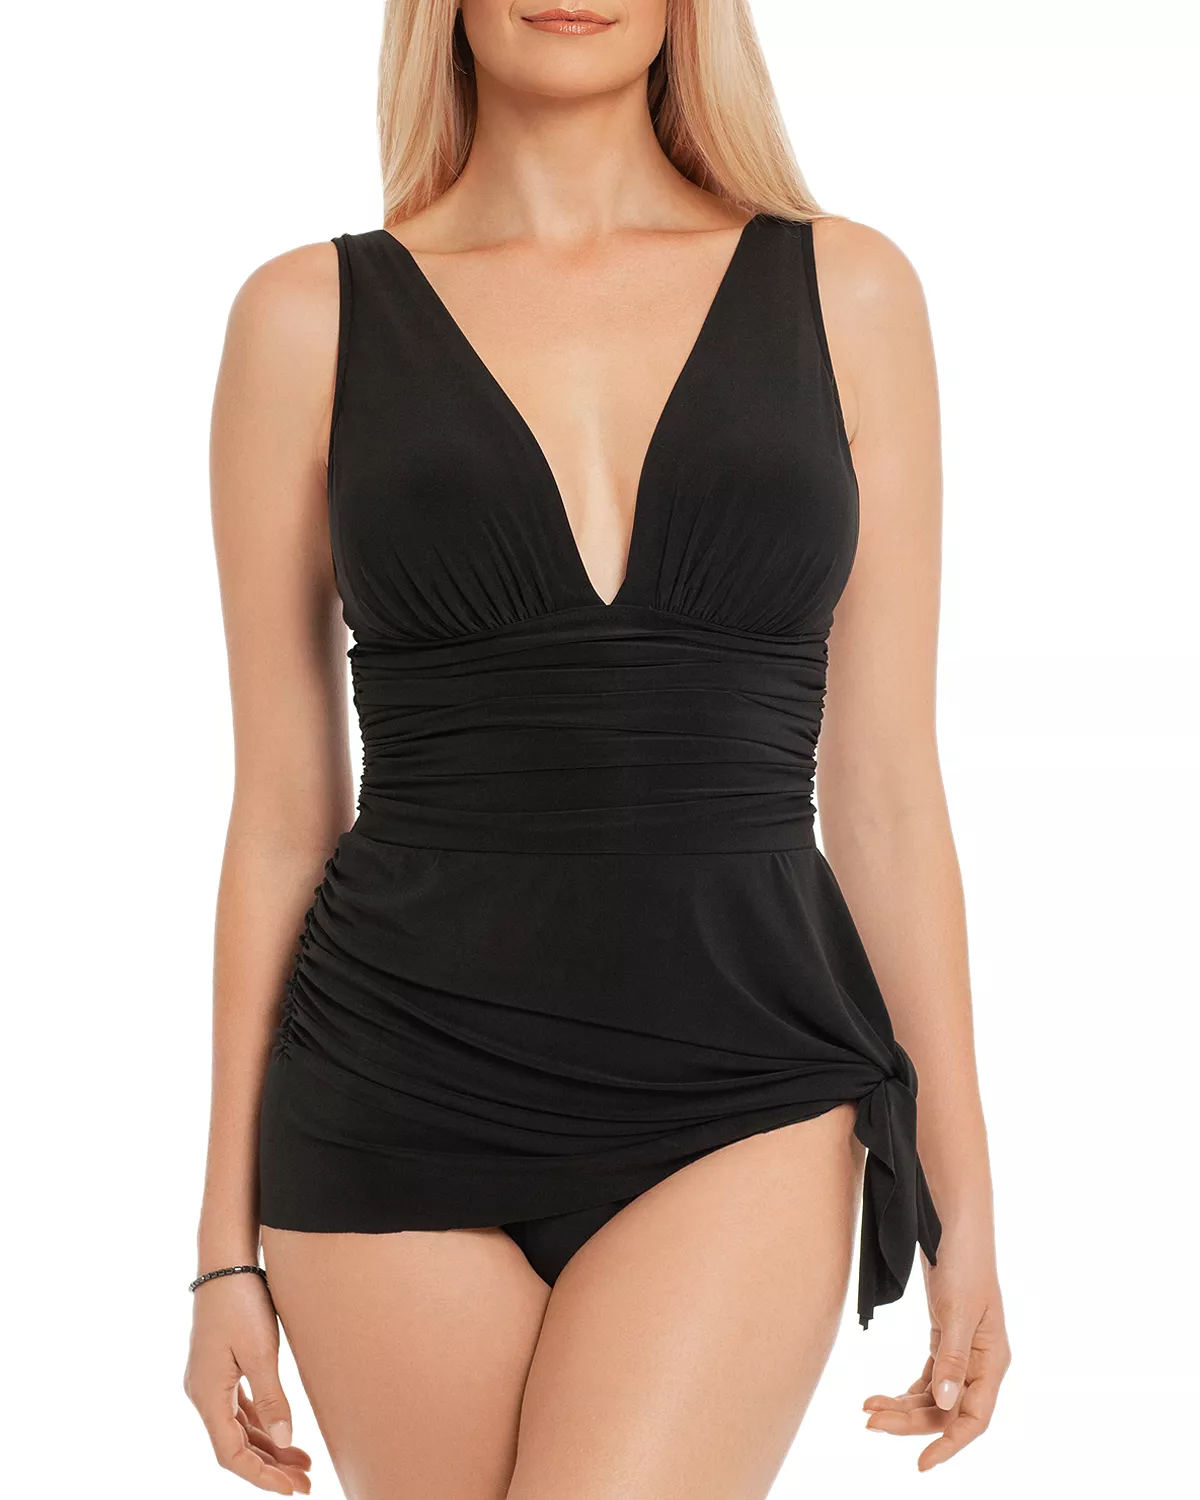 Oval Body Type Empire West Swimsuit